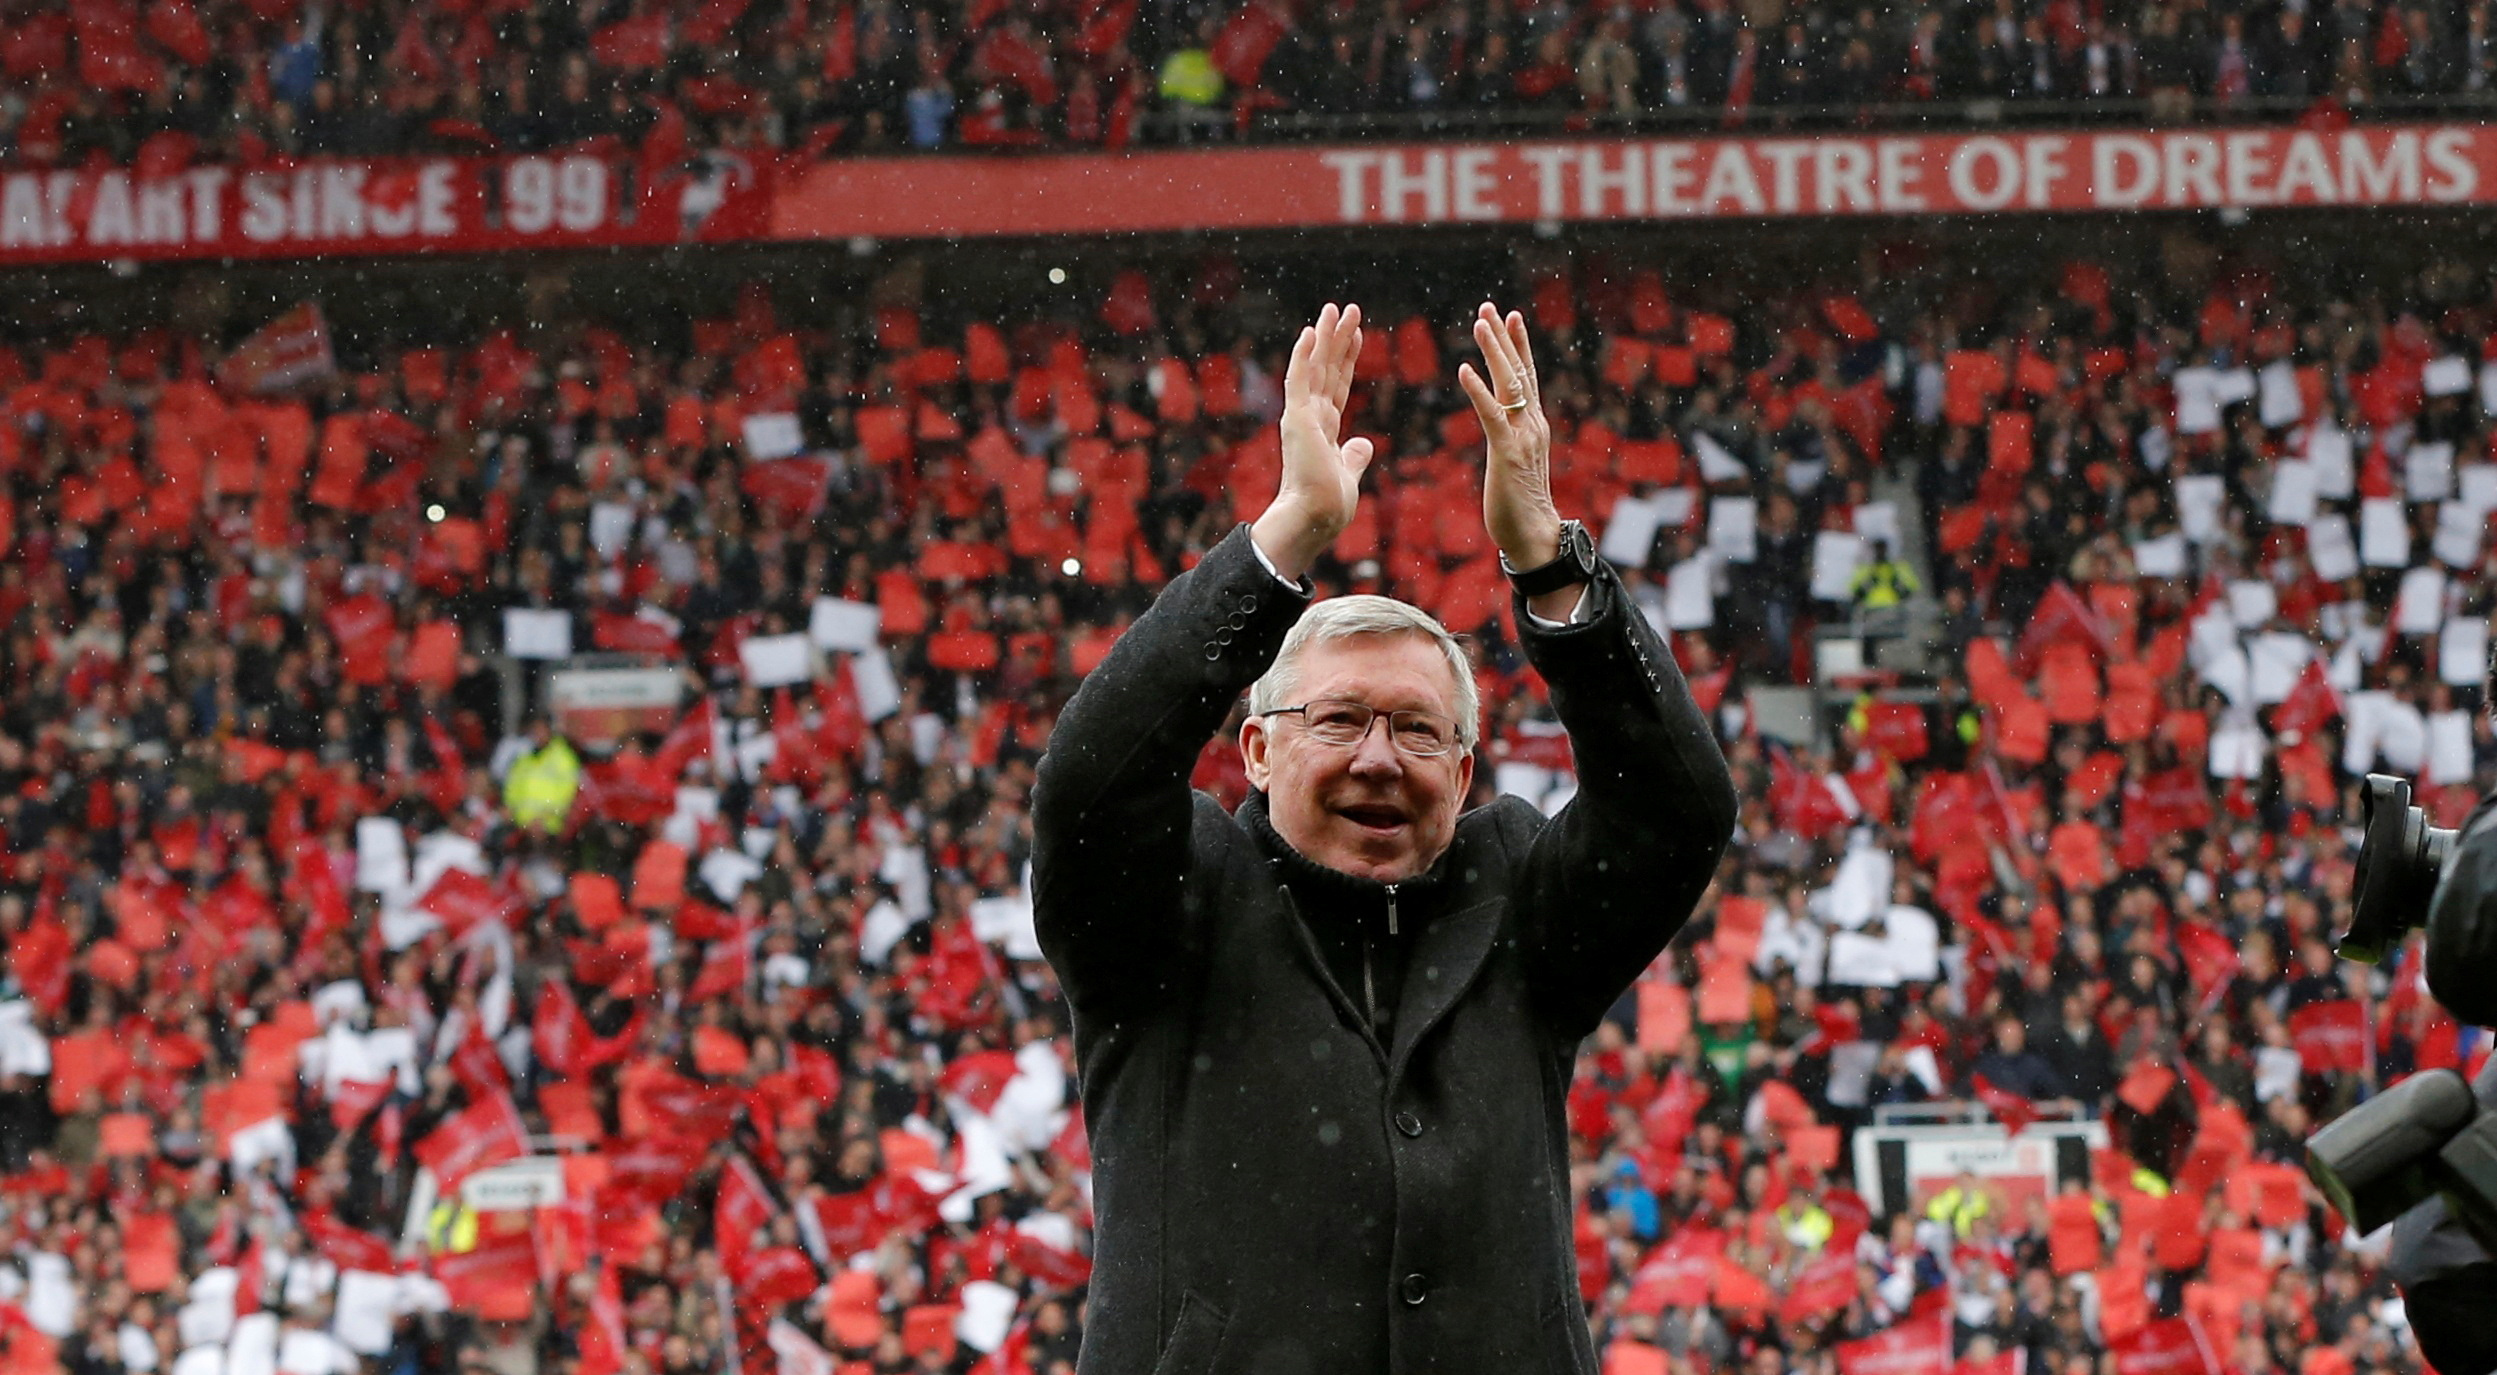 Manchester United manager Alex Ferguson waves to the crowd as he arrives at Old Trafford ground for the last time before retiring, ahead of the English Premier League football match against Swansea City at Old Trafford Stadium in Manchester, north from England, on May 12, 2013 (REUTERS/Phil Noble)